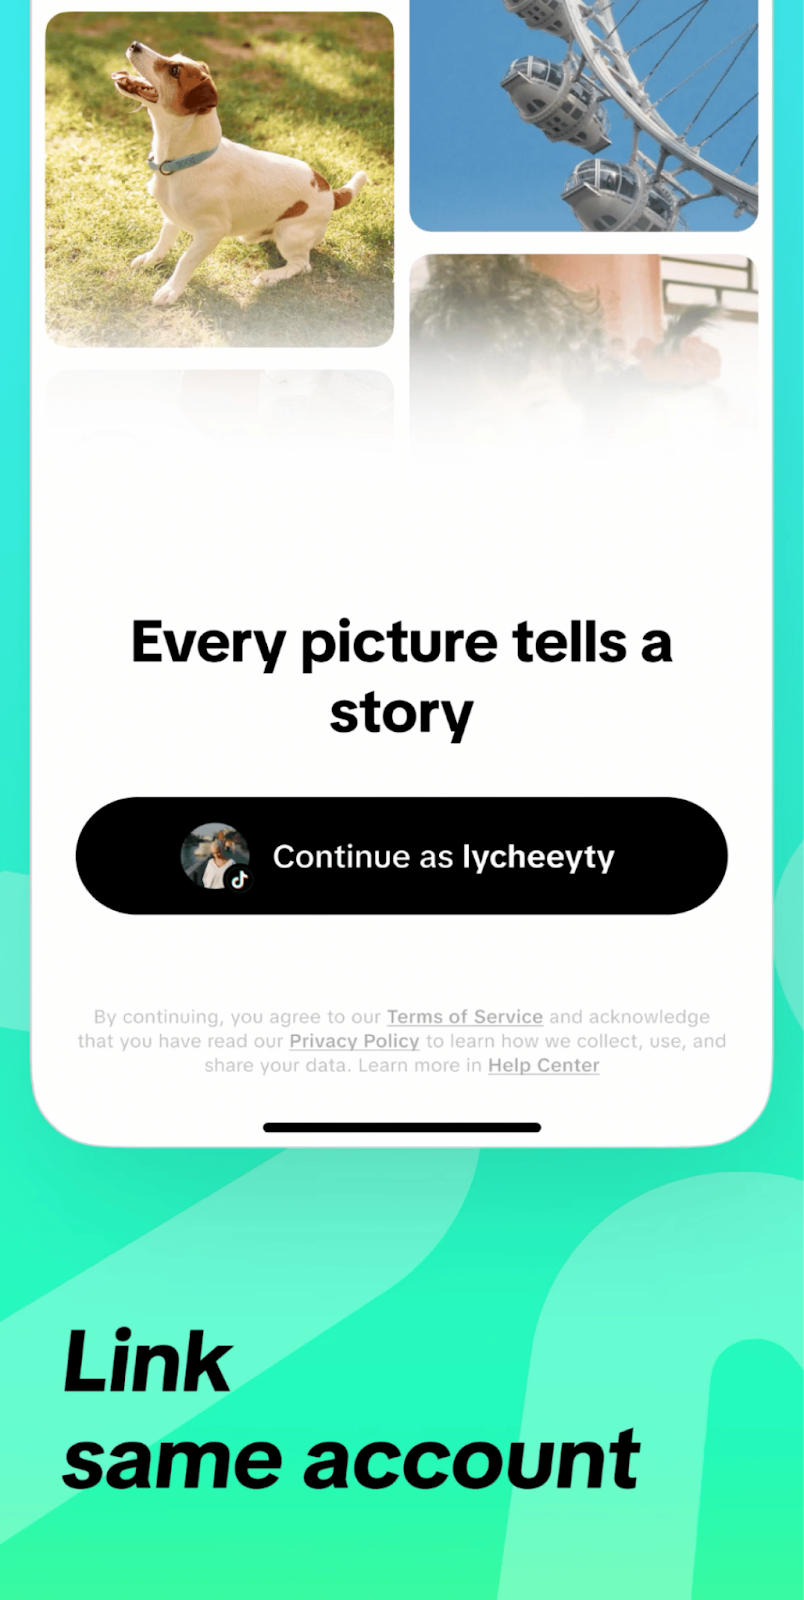 TikTok Notes: Everything We Know About the New Photo App (+ Screenshots)